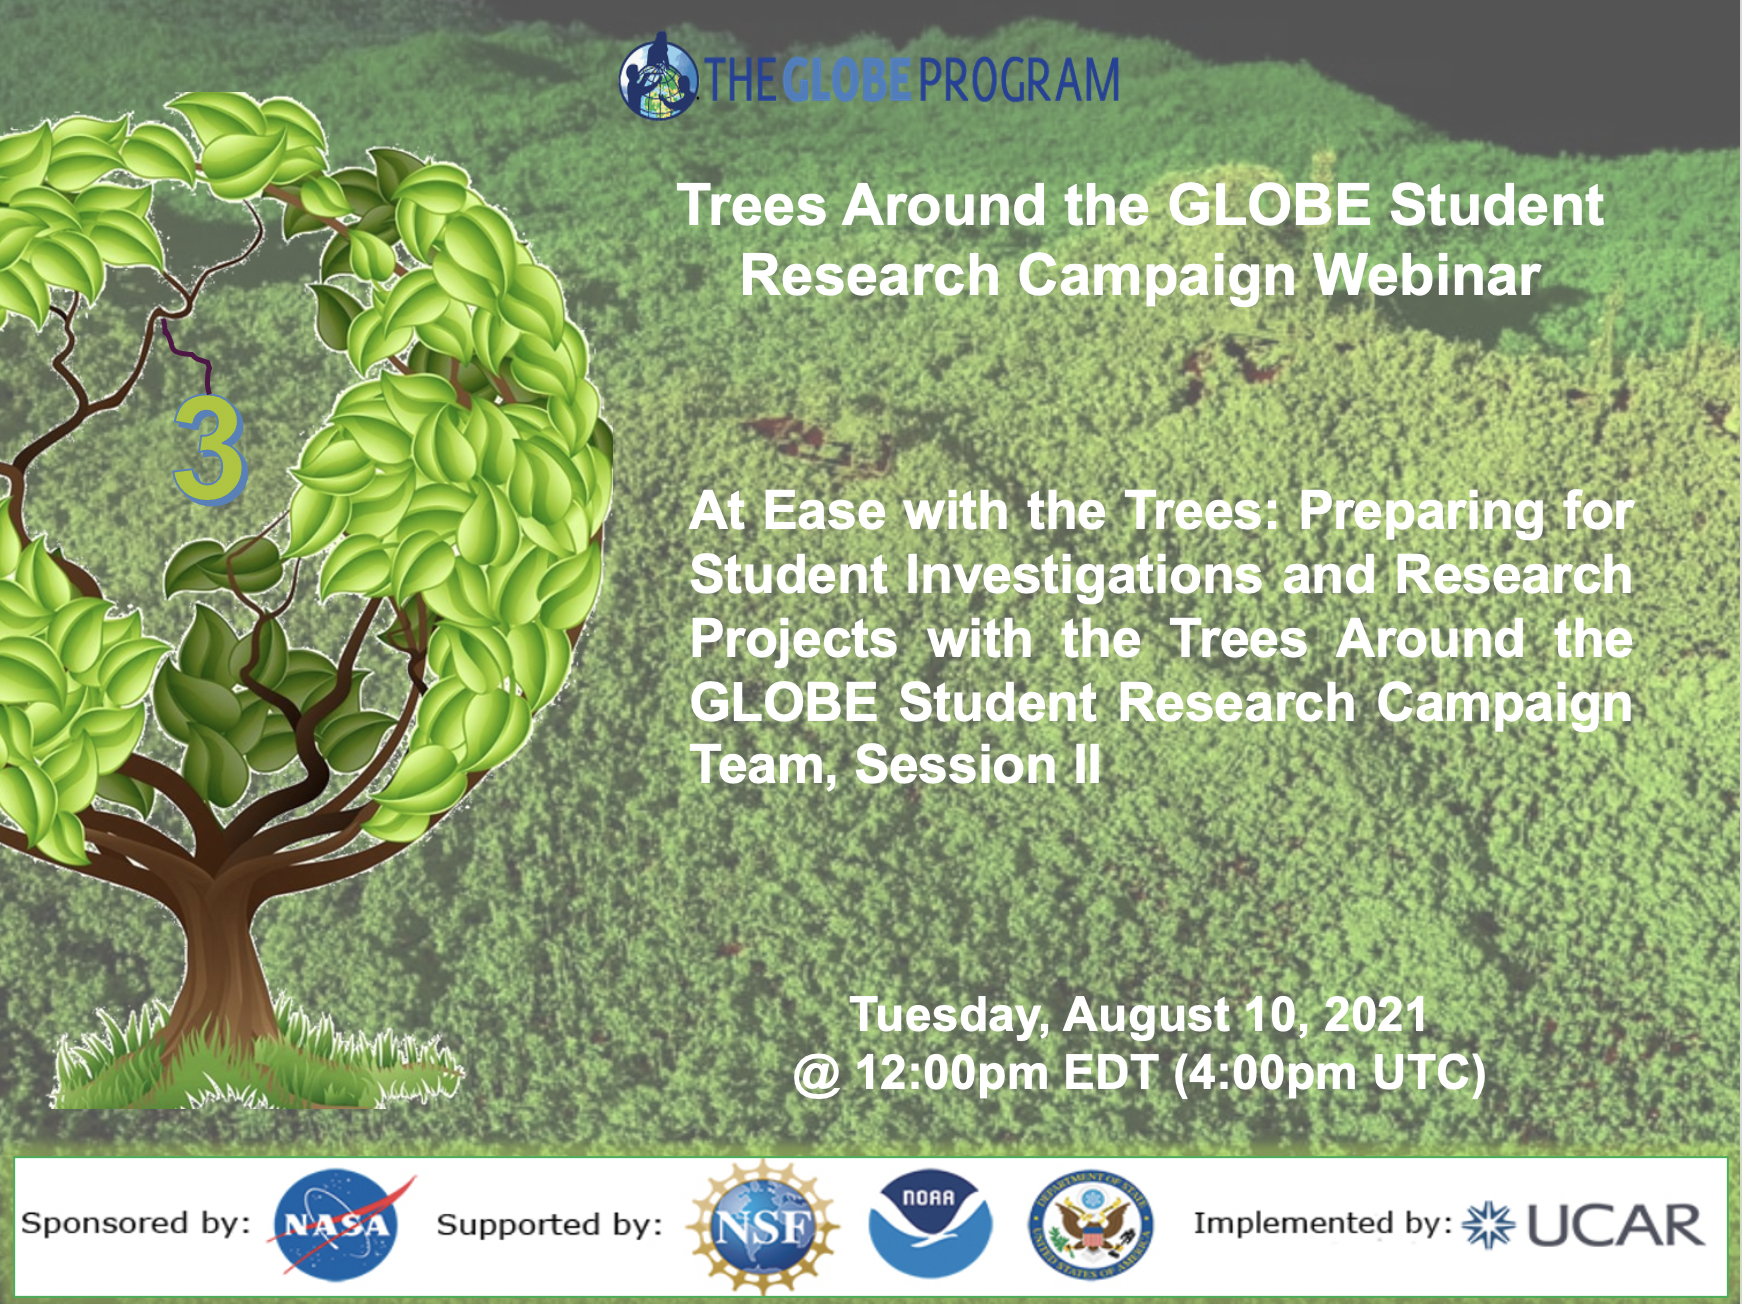 Trees Around the GLOBE campaign webinar shareable, with a tree and a grass landscape in the background